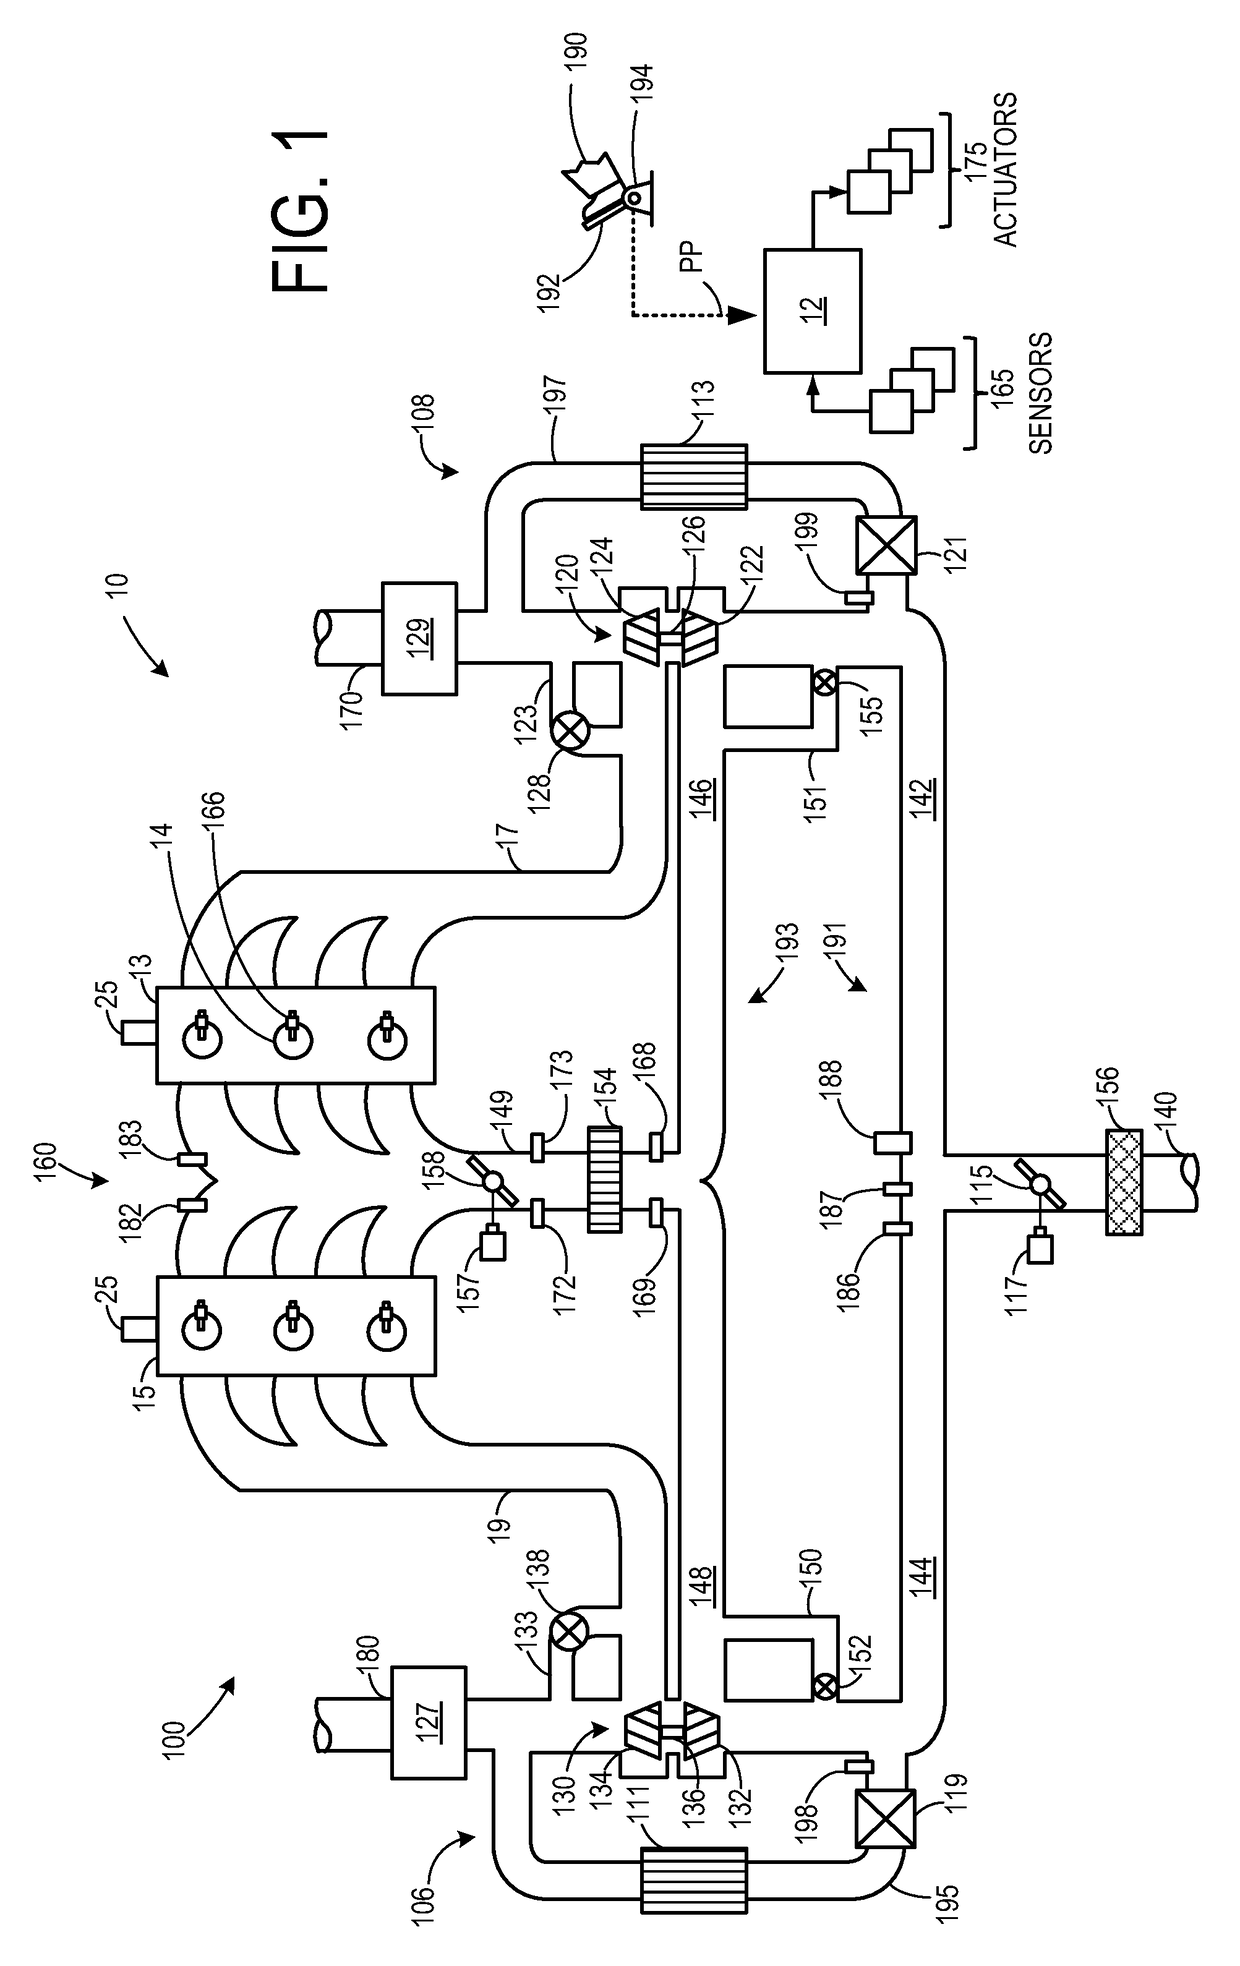 Methods and systems for low-pressure exhaust gas recirculation